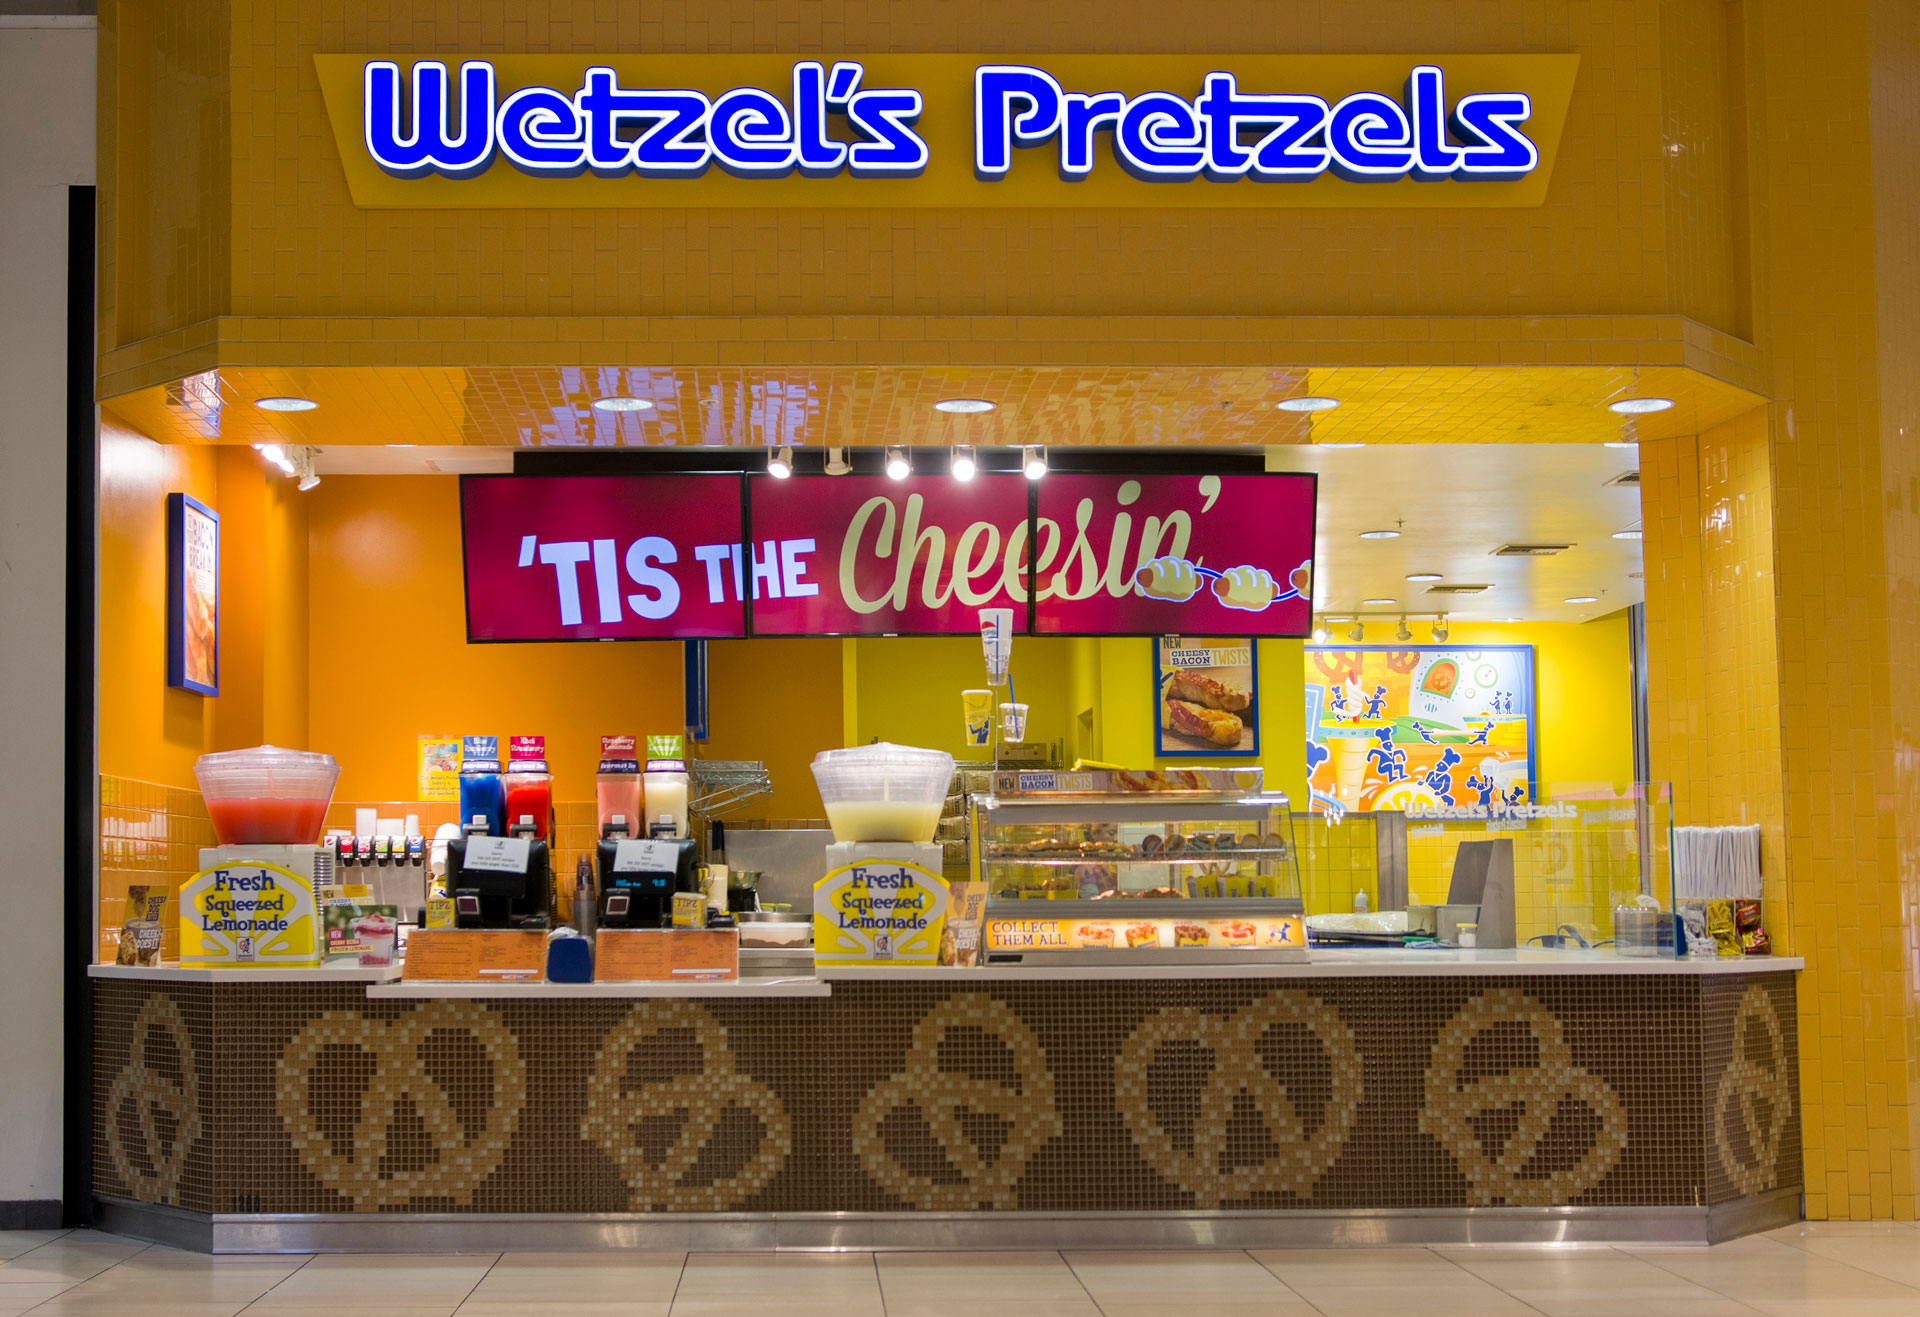 Wetzel's Pretzel's with commercial digital signage created by 10net, who is a digital signage supplier located in North Vancouver, BC